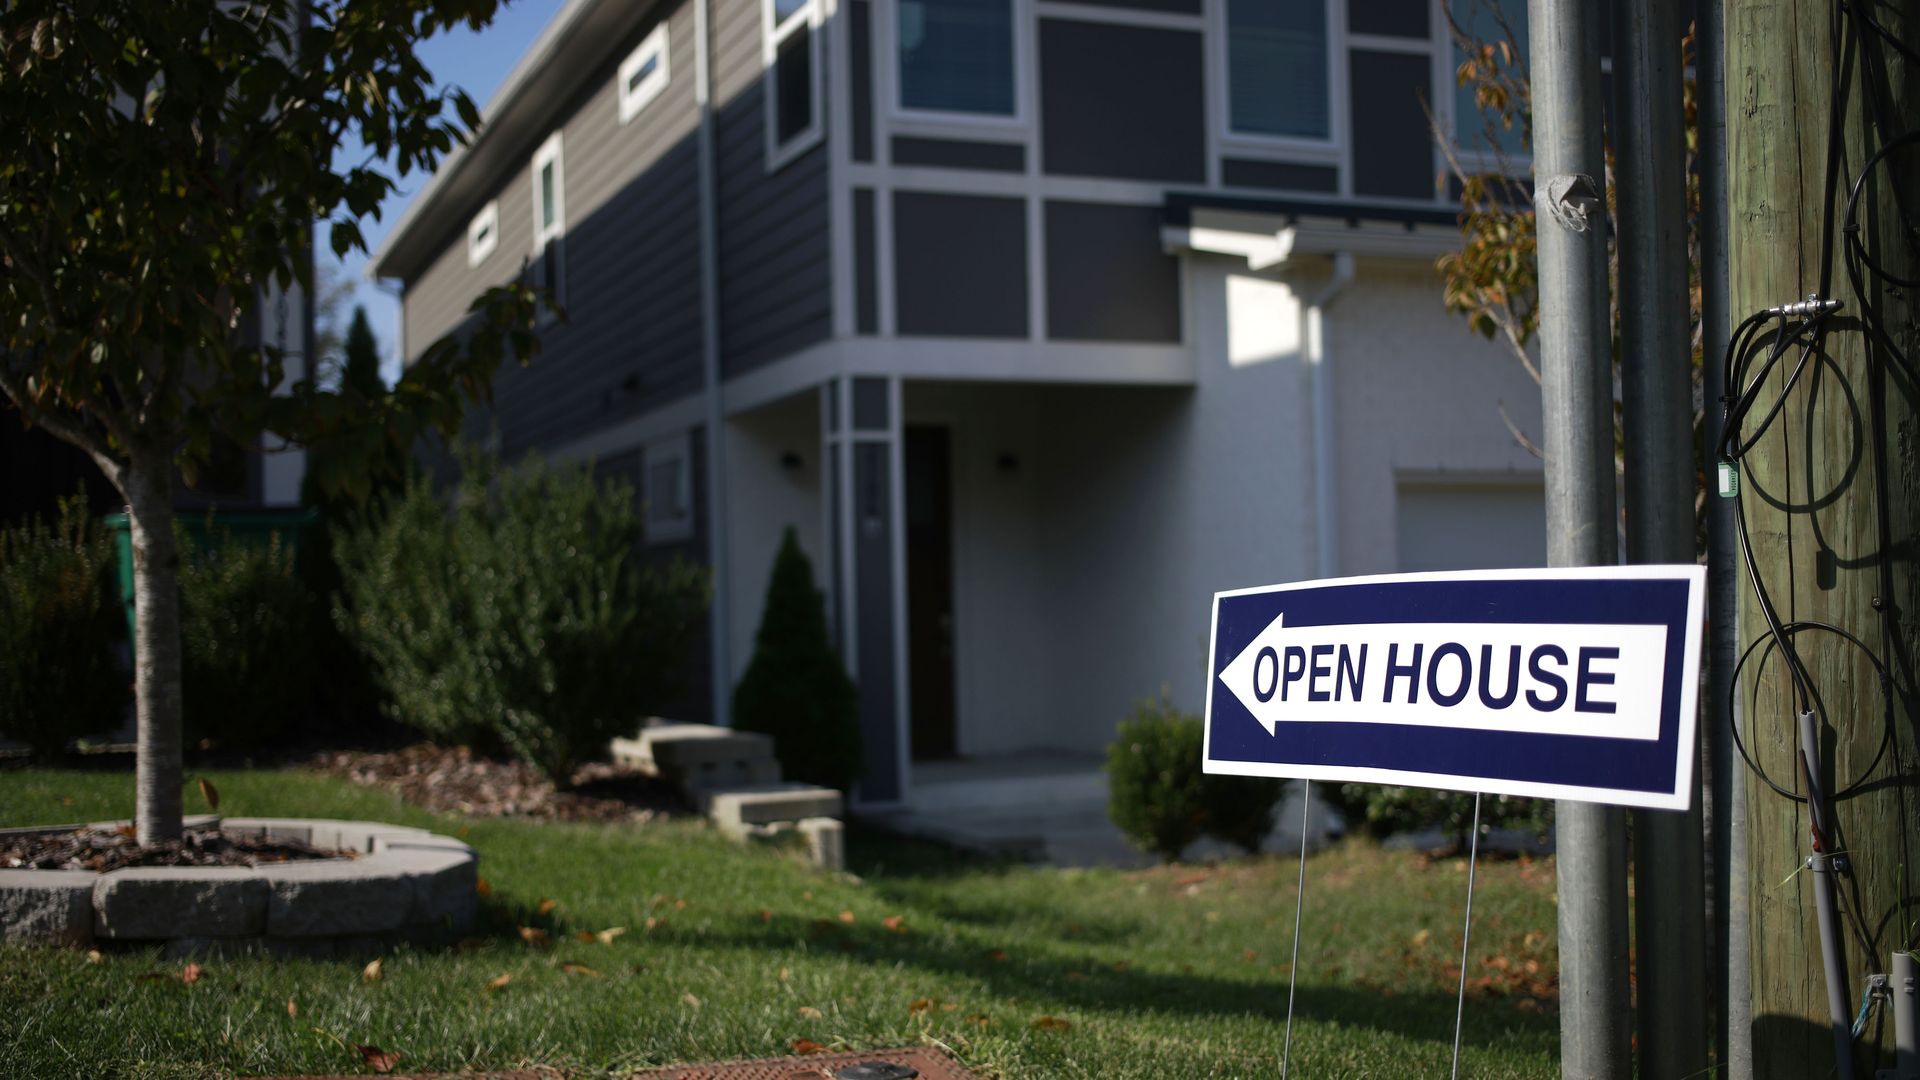 n "Open House" sign outside a home in Nashville, Tennessee, U.S., on Sunday, Oct. 24, 2021